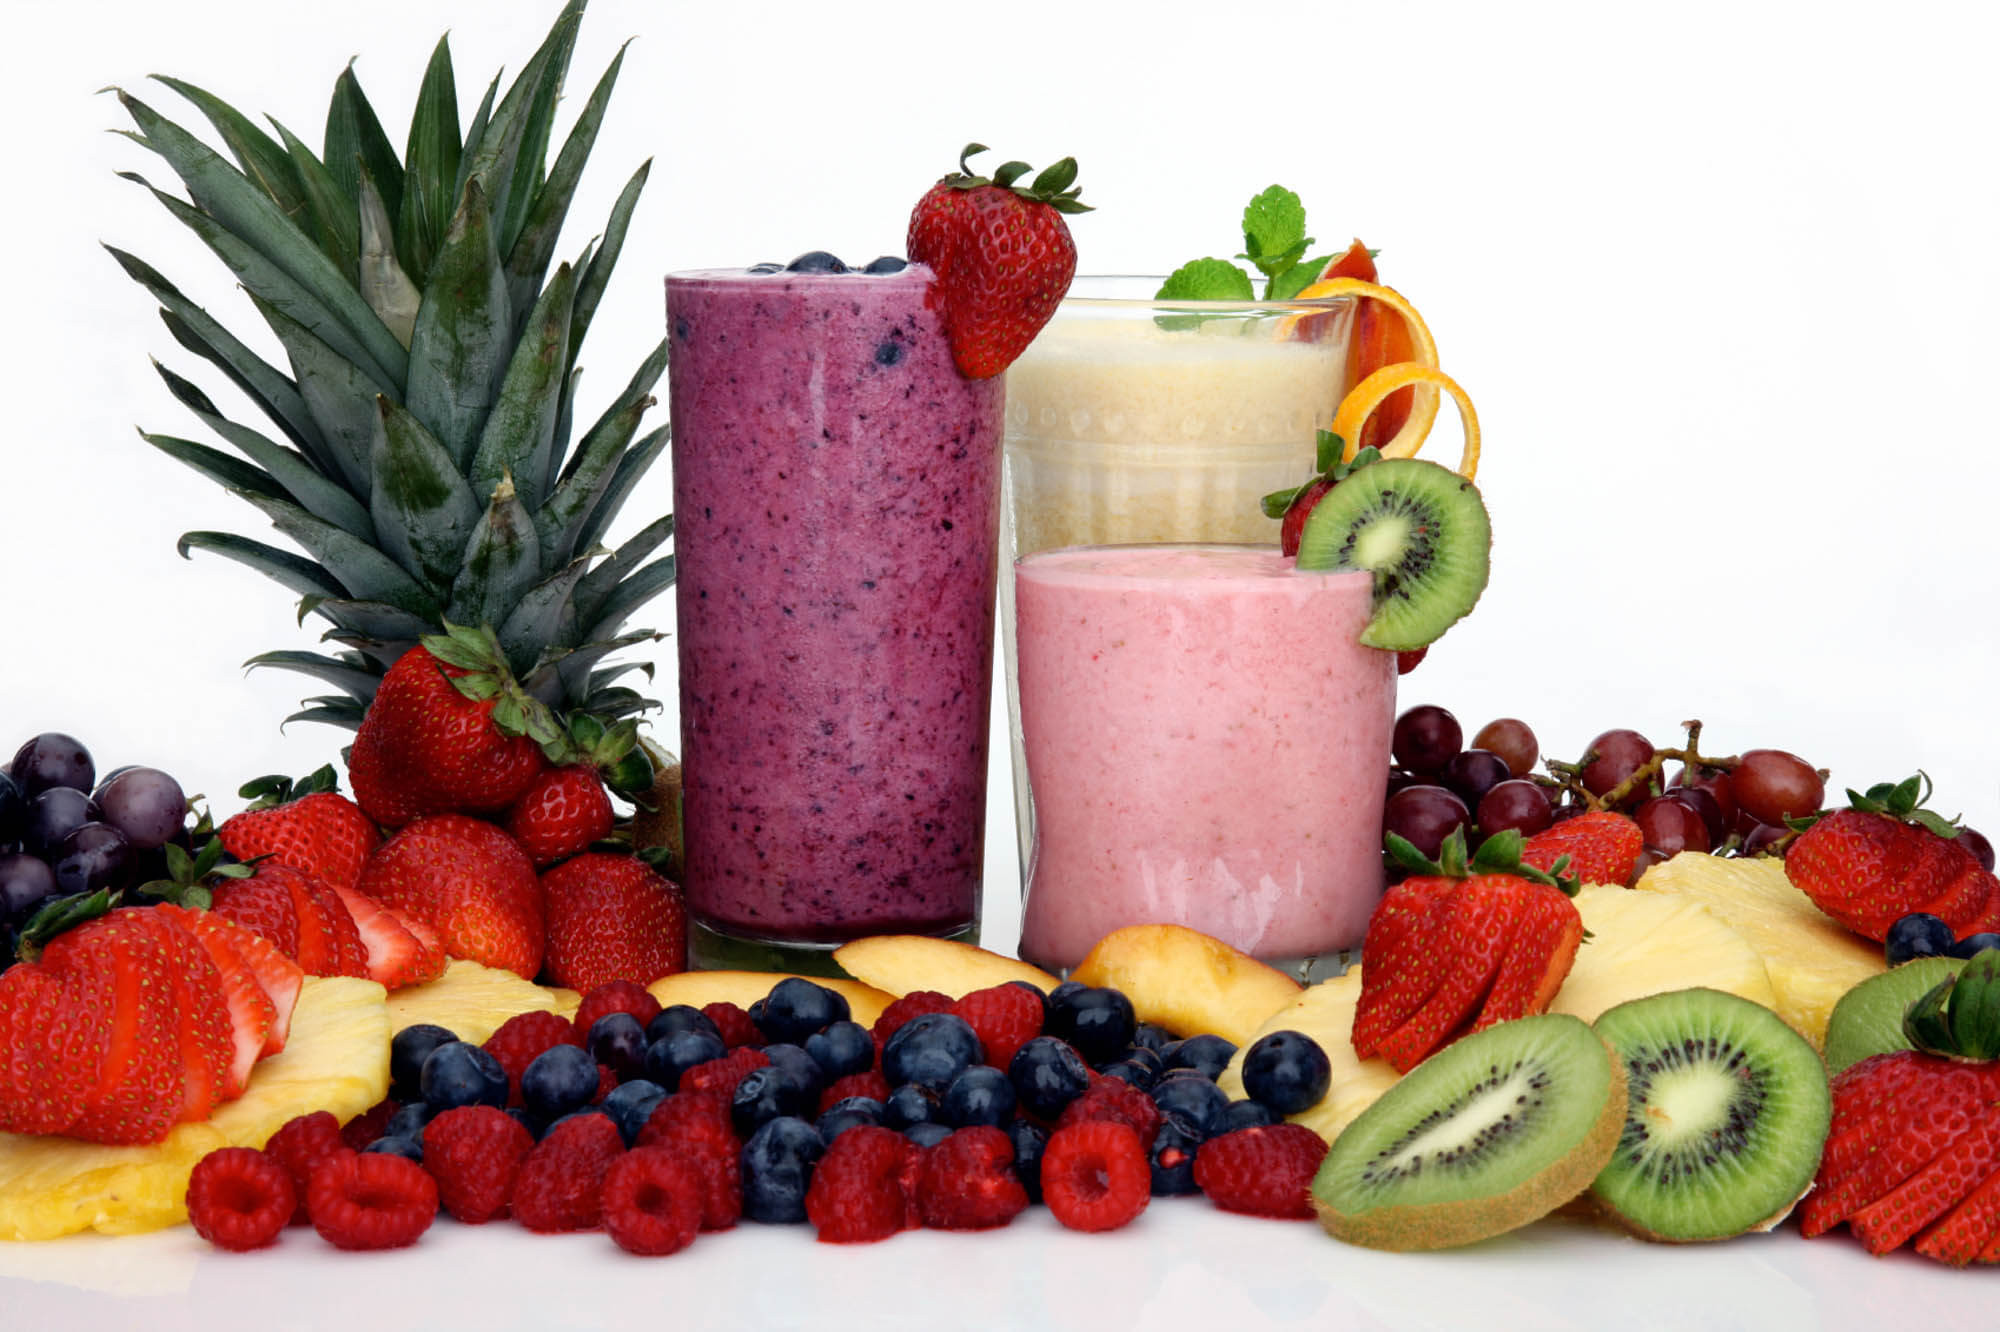 Easy Healthy Fruit Smoothies
 The Smoothie Guide — Gentleman s Gazette